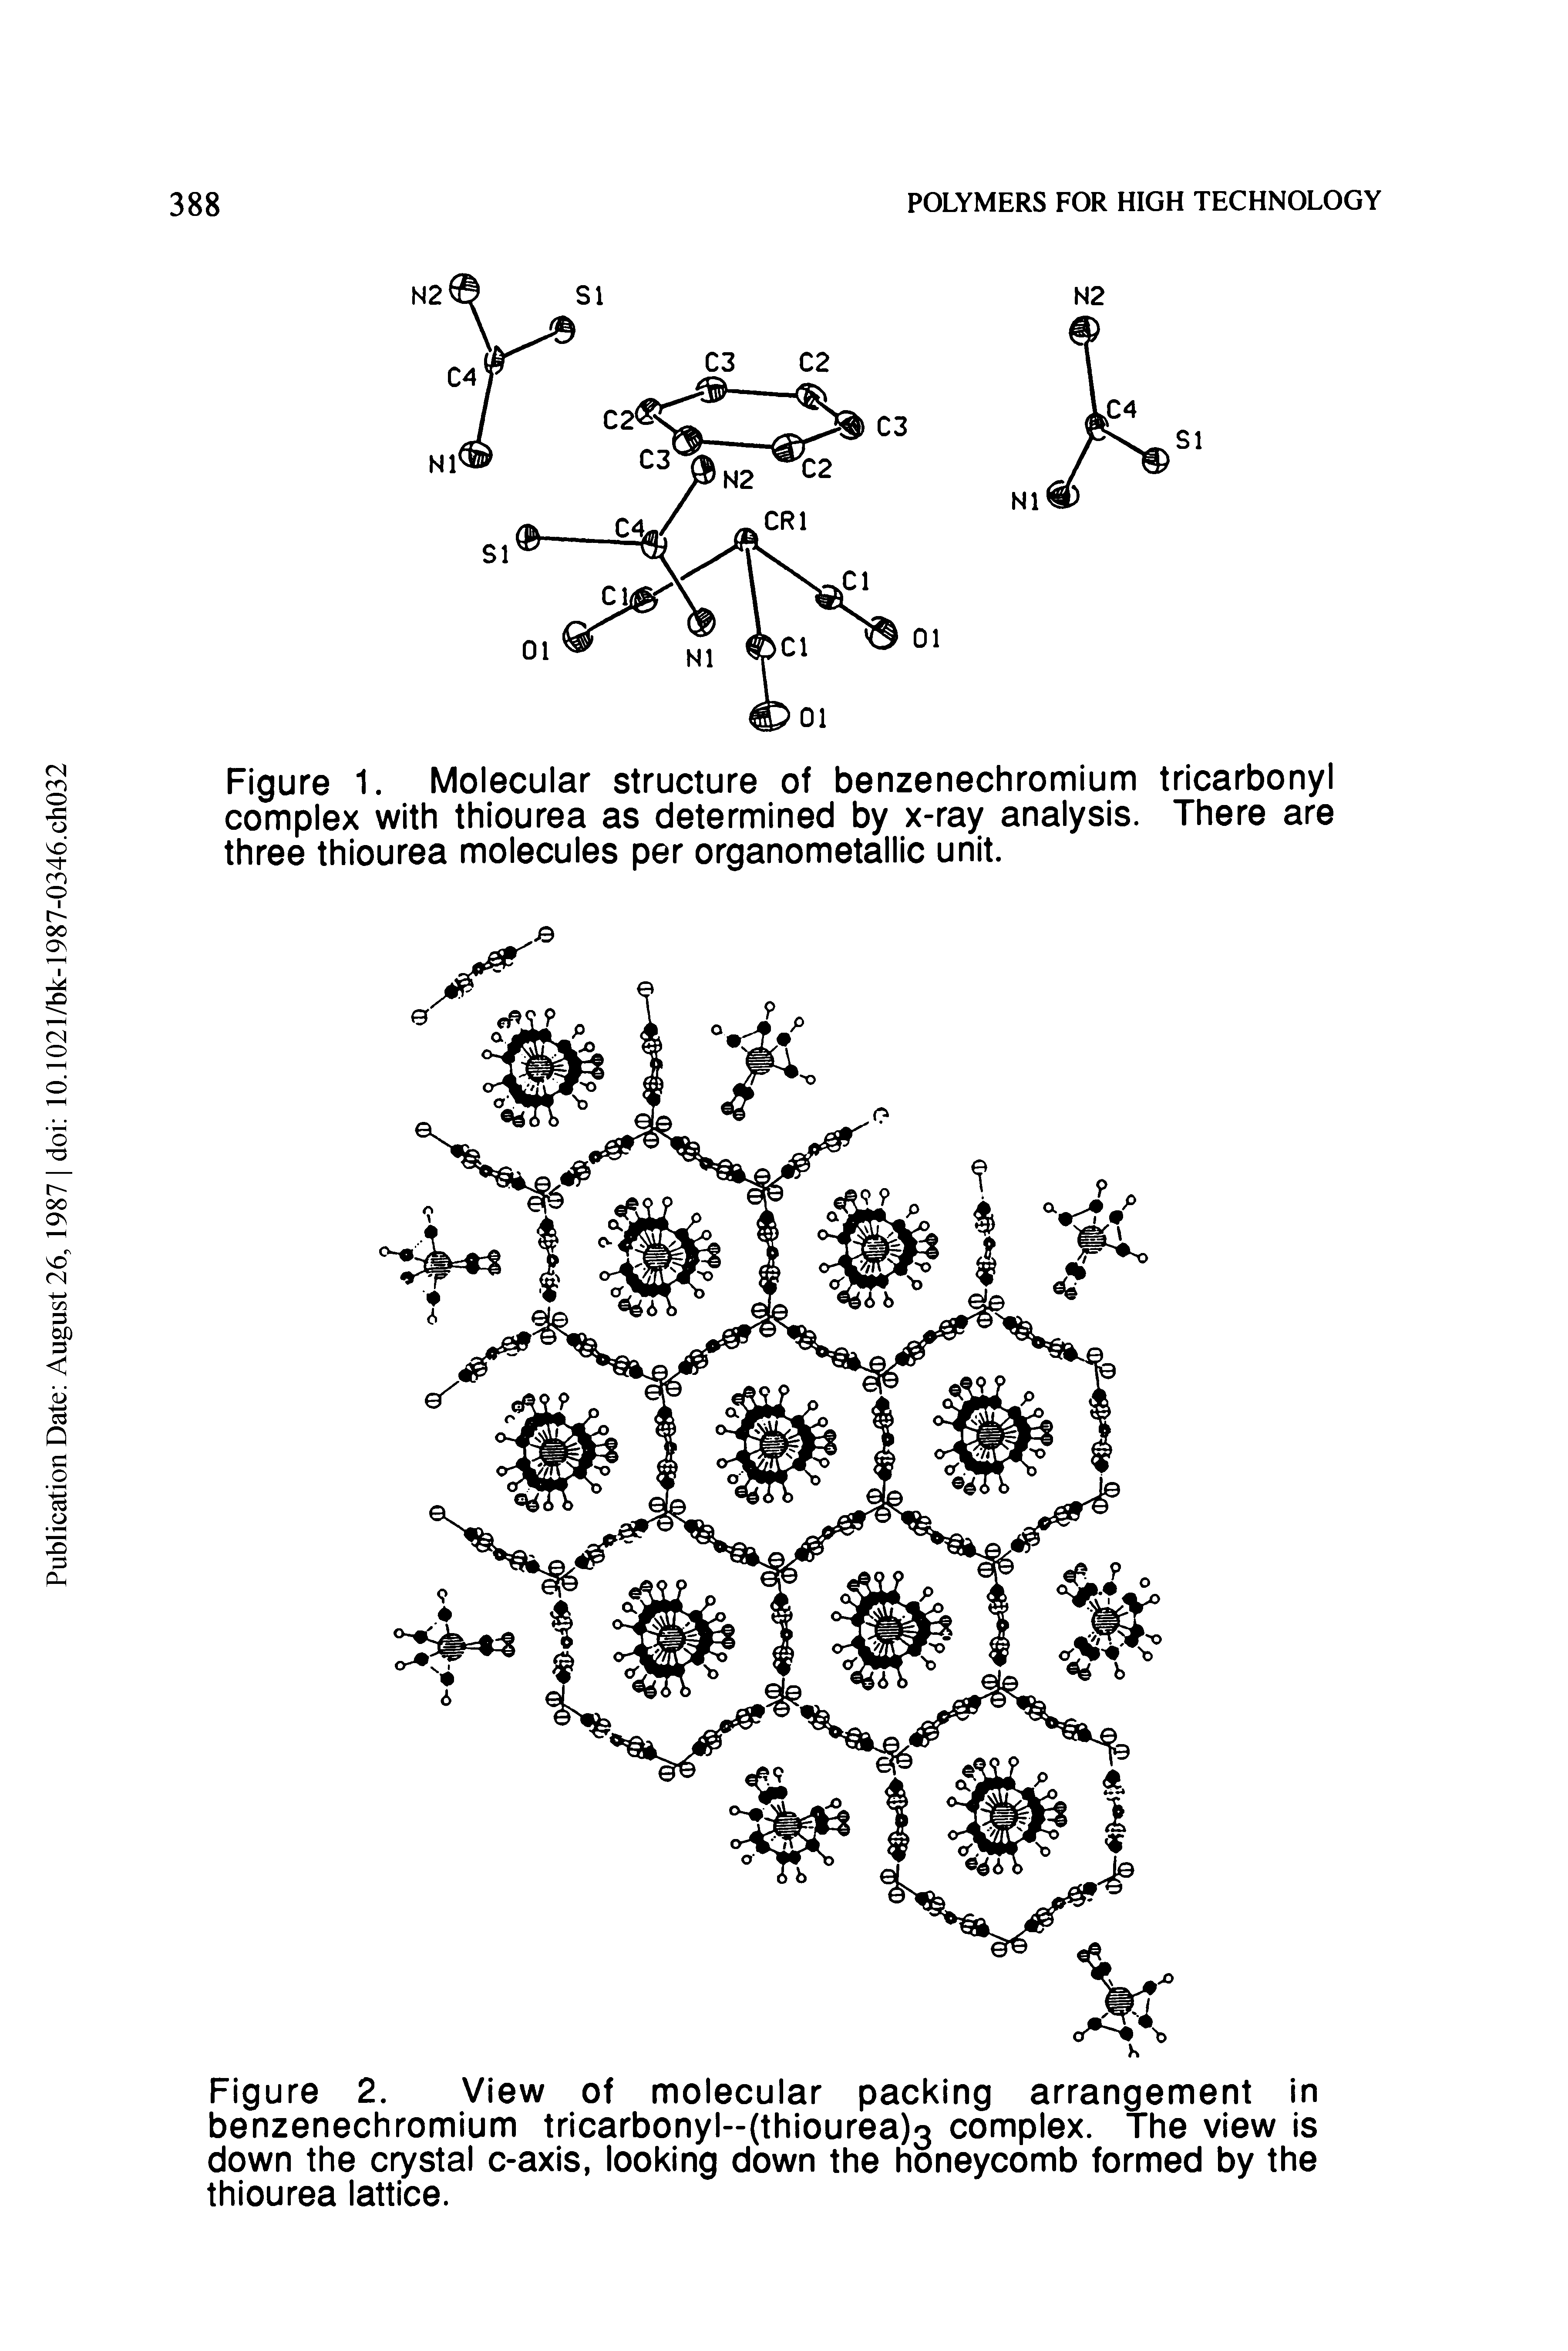 Figure 1. Molecular structure of benzenechromium tricarbonyl complex with thiourea as determined by x-ray analysis. There are three thiourea molecules per organometallic unit.